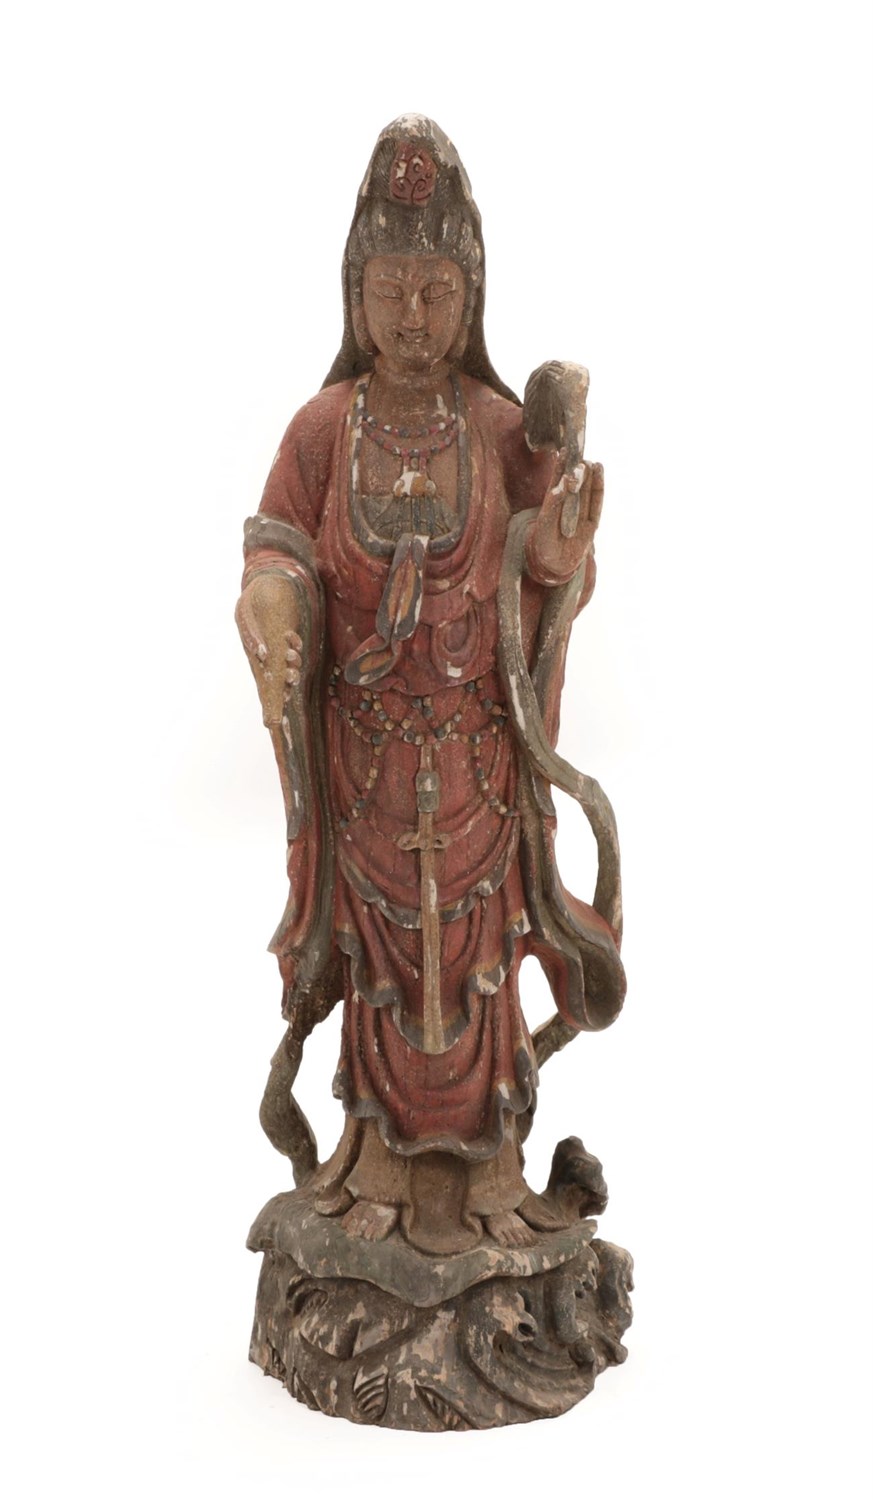 Lot 20 - A Chinese Painted Wood and Gesso Figure of Guanyin, 19th century, standing wearing flowing robes, a